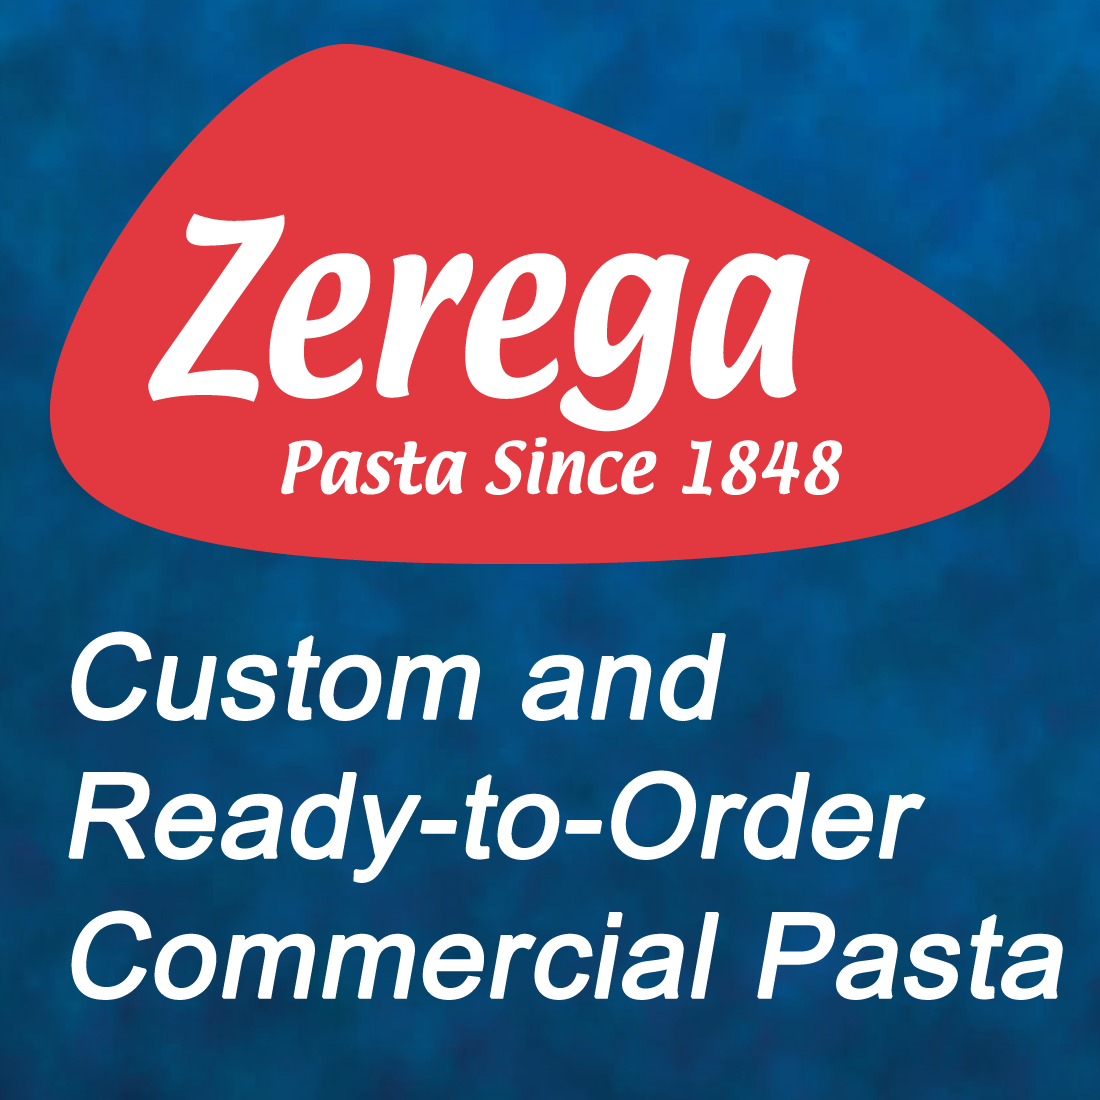 Since 1848, America's Leading Custom Pasta Maker! Zerega is America's leading producer of custom pasta for the food processing, foodservice, and retail markets.